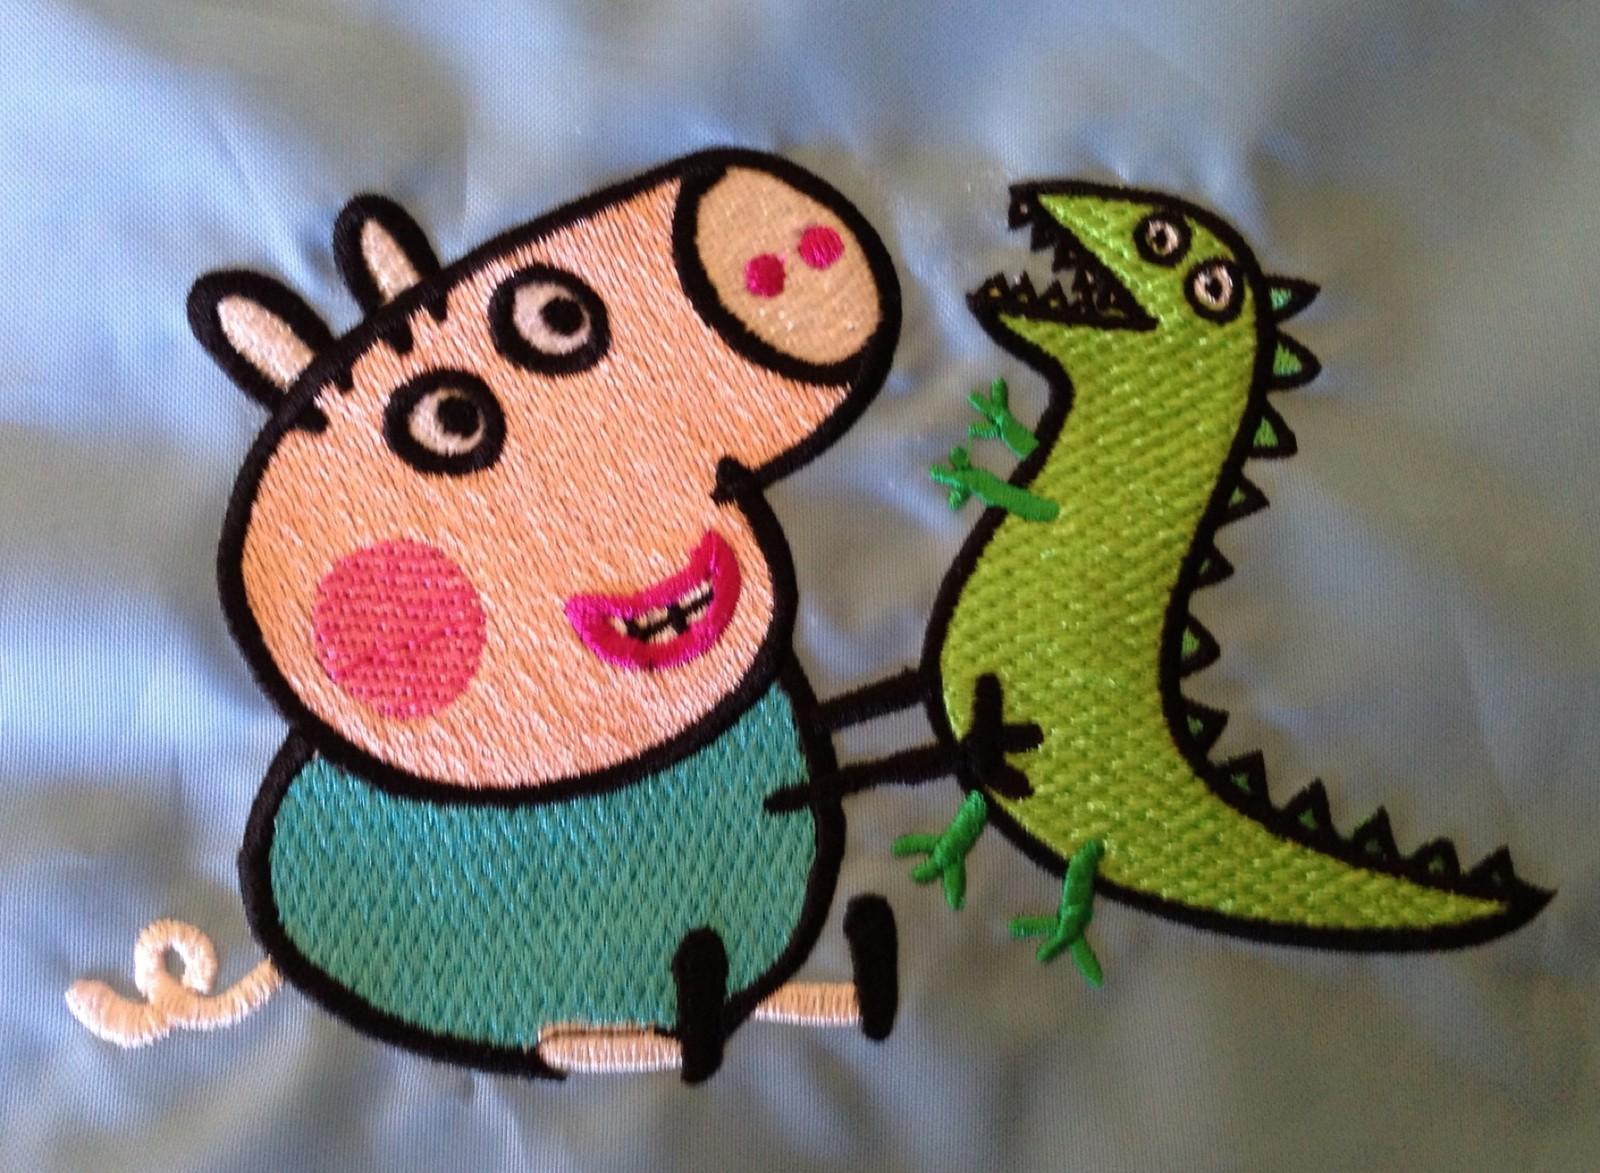 Peppa Pig with Caterpillar embroidery design